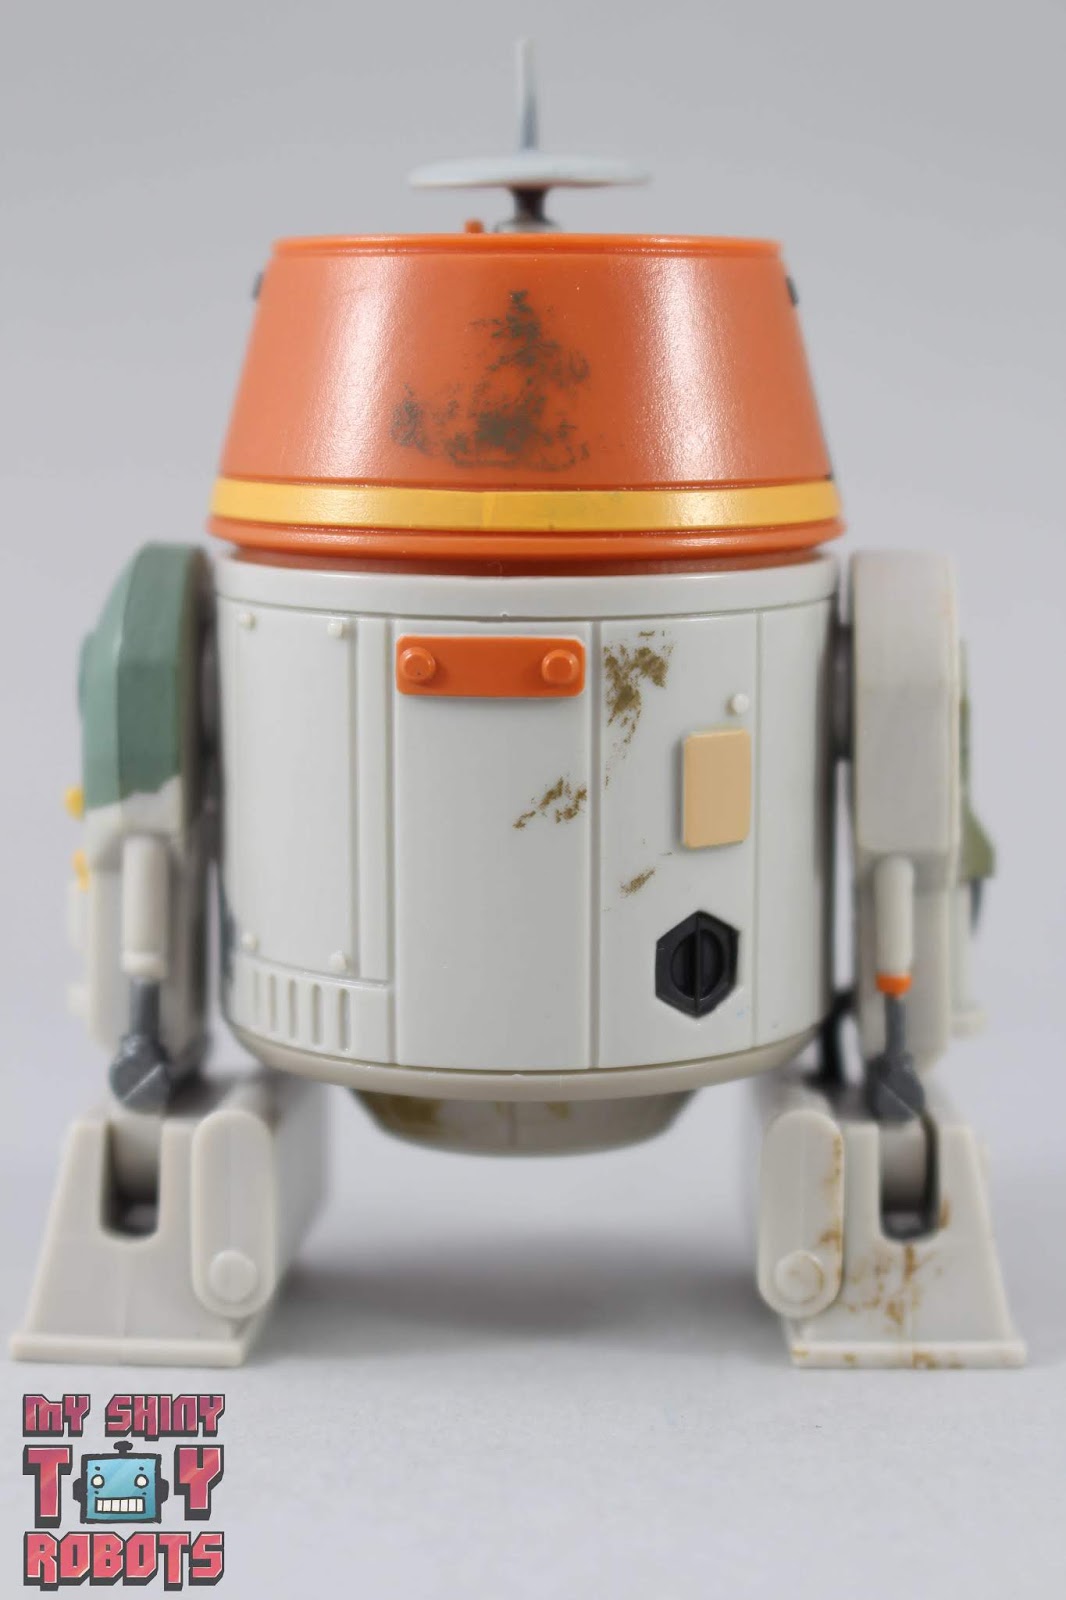 My Shiny Toy Robots: Toybox REVIEW: Star Wars Black Series Chopper